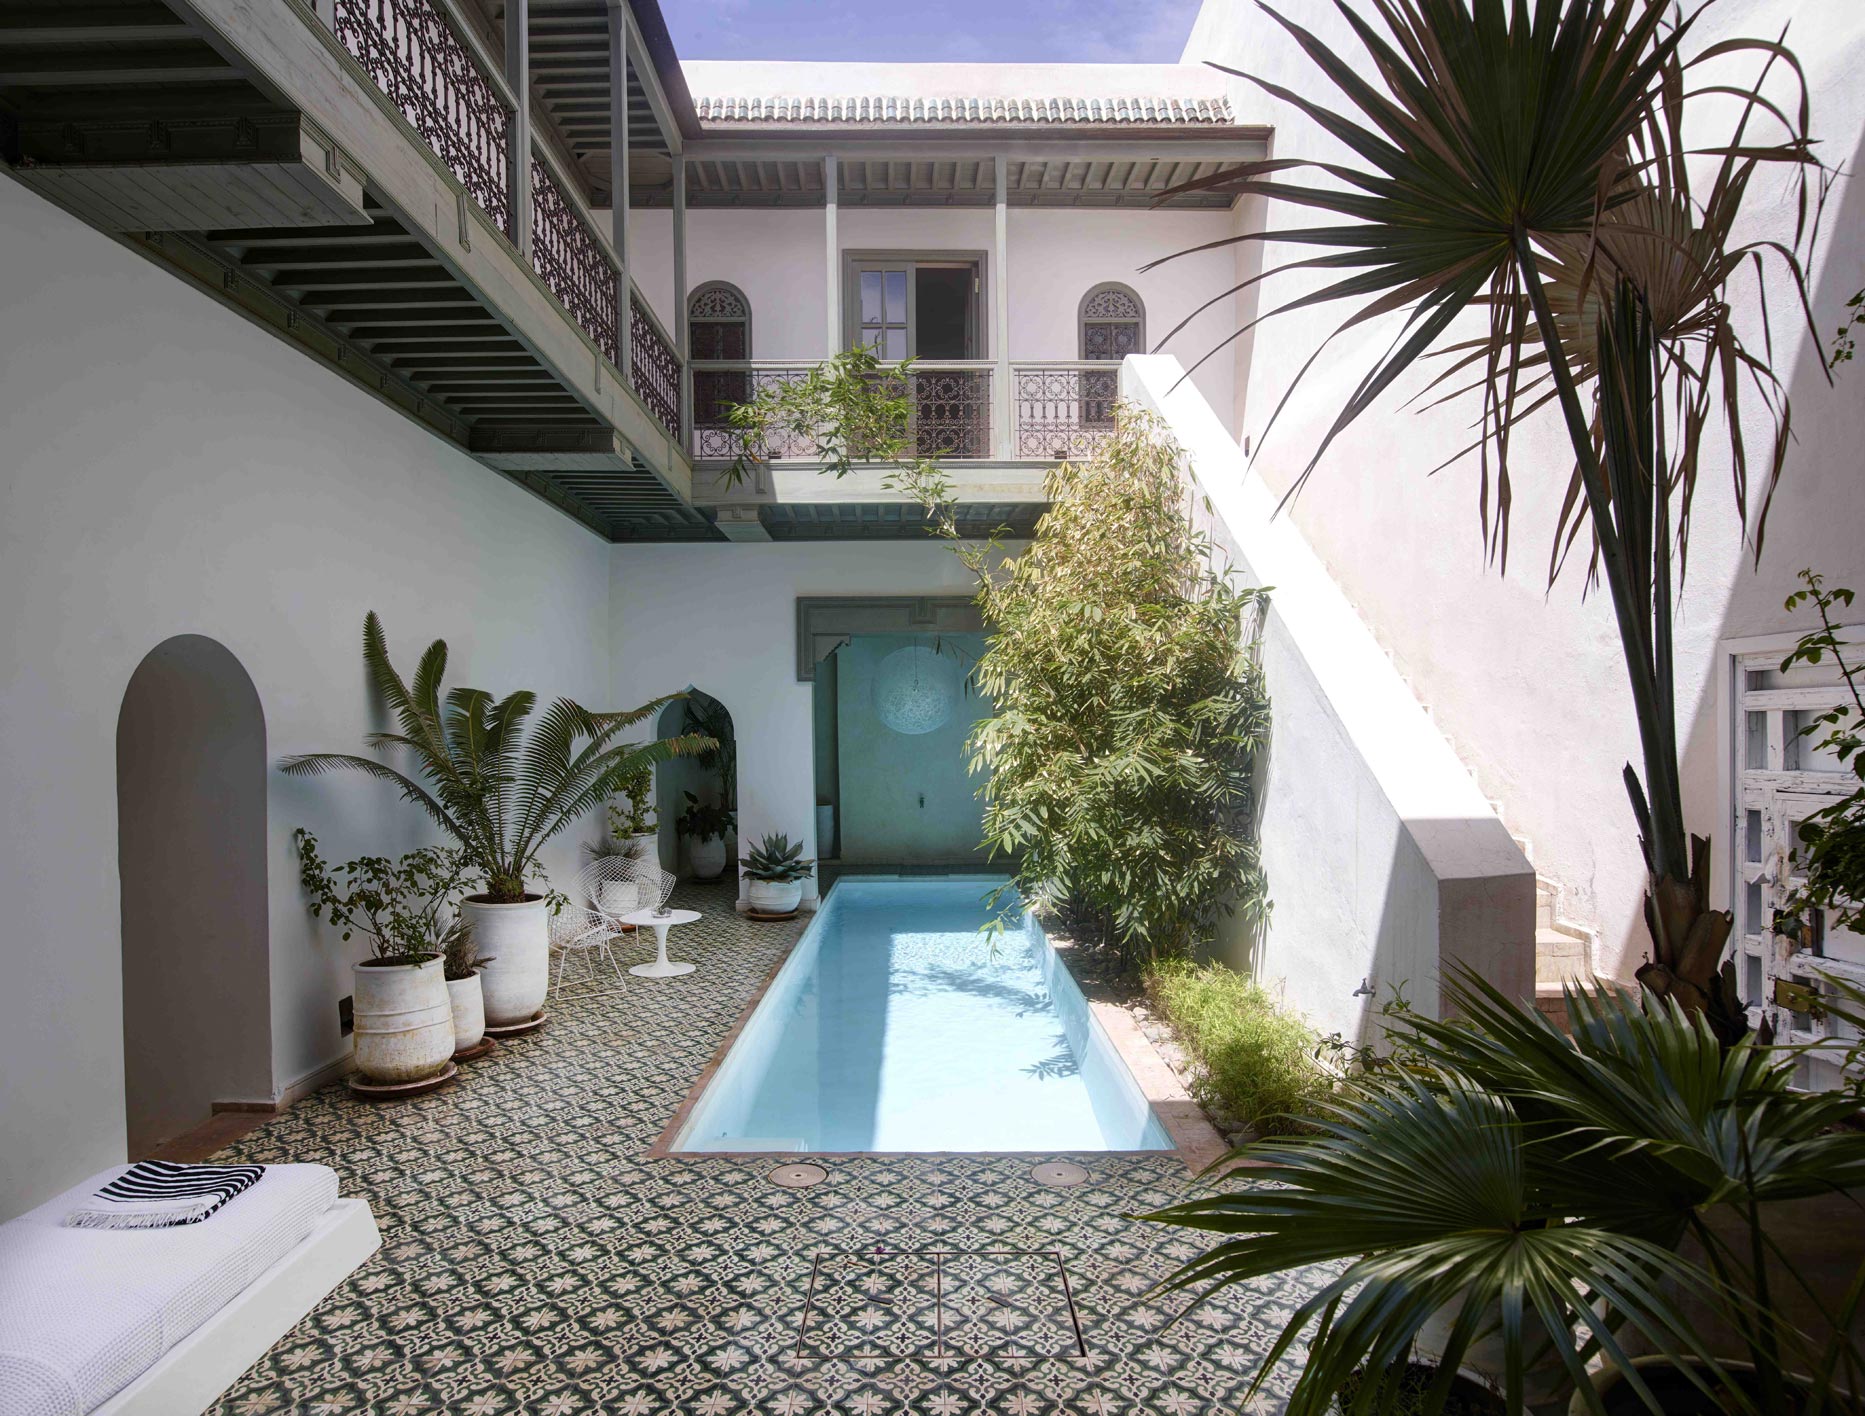 Riad Mena, Marrakech, Morocco Surrounded by narrow, bustling streets and quintessentially Moroccan stone alleyways, Riad Mena stands discreetly on the eastern edge of Marrakech’s legendary Medina. Art pundit Philomena Schurer Merckoll took three years to transform the traditional Moroccan house - originally a private residence - into a sleek five-room lodging, featuring polished, modern interiors by local designer Romain Michel-Ménière, interspersed with traditional gems such as vintage kilims, original tiles and leather poufs. Unwind in a traditional hammam or sit under the stars on the terrace where vegetable tagines, couscous and teas are served to a backdrop of old movies. The hotel also boasts a permaculture farm. Located just outside the city in Ourika Valley, two small guesthouses, a hammam and natural swimming pool will be available by the end of the year.
                              
                              Riad Mena, 73 Derb J´Did (off Place Douar Graoua); Riadmenaandbeyond.com; Rates from €140